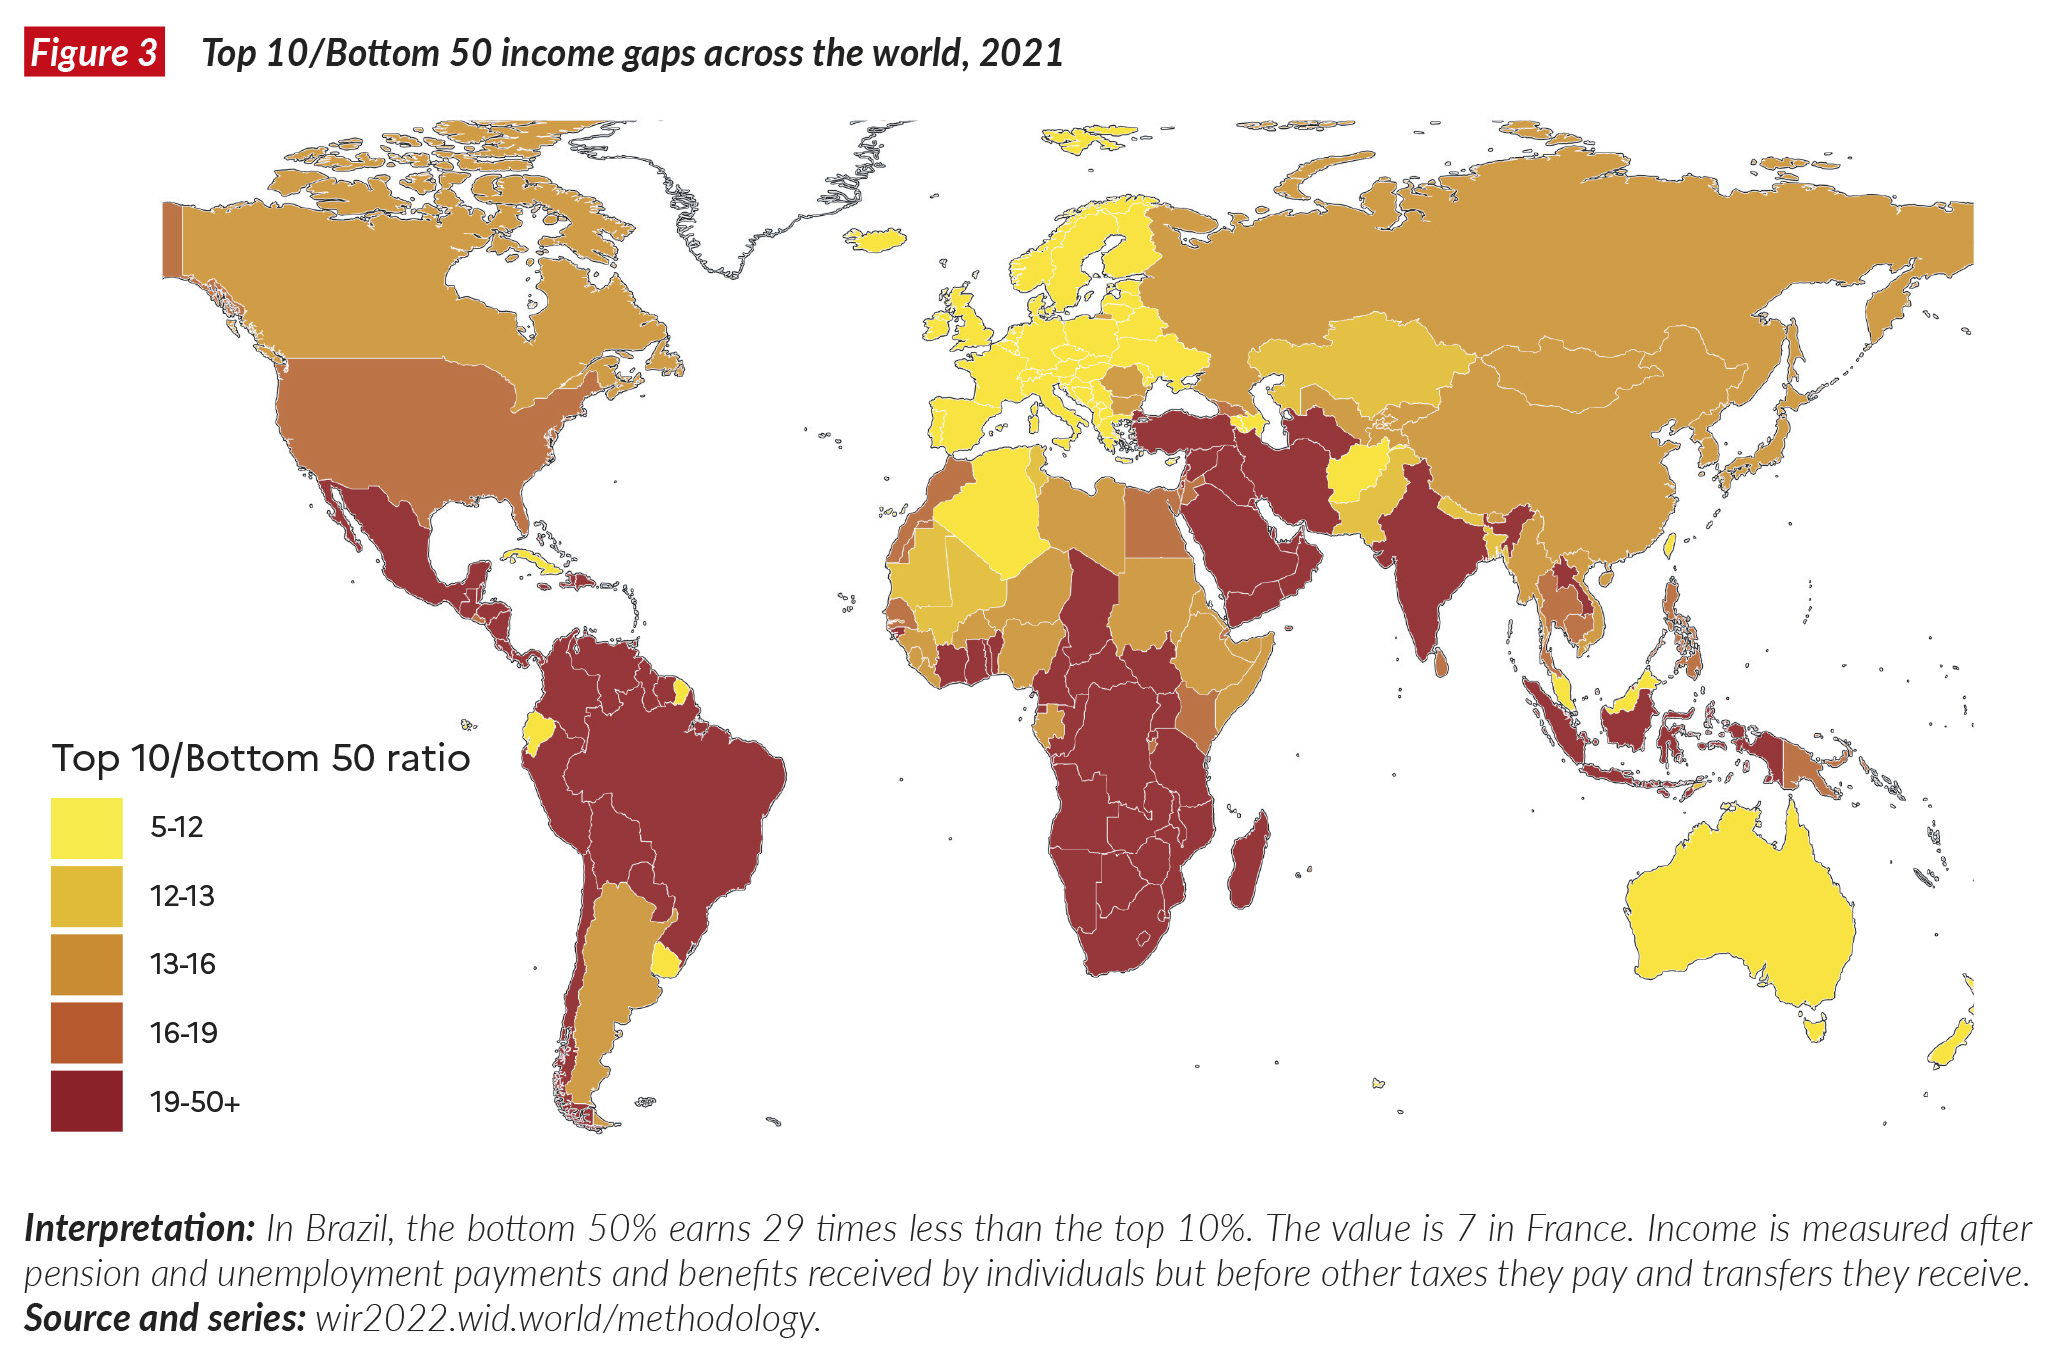 F3. Income gaps across the world